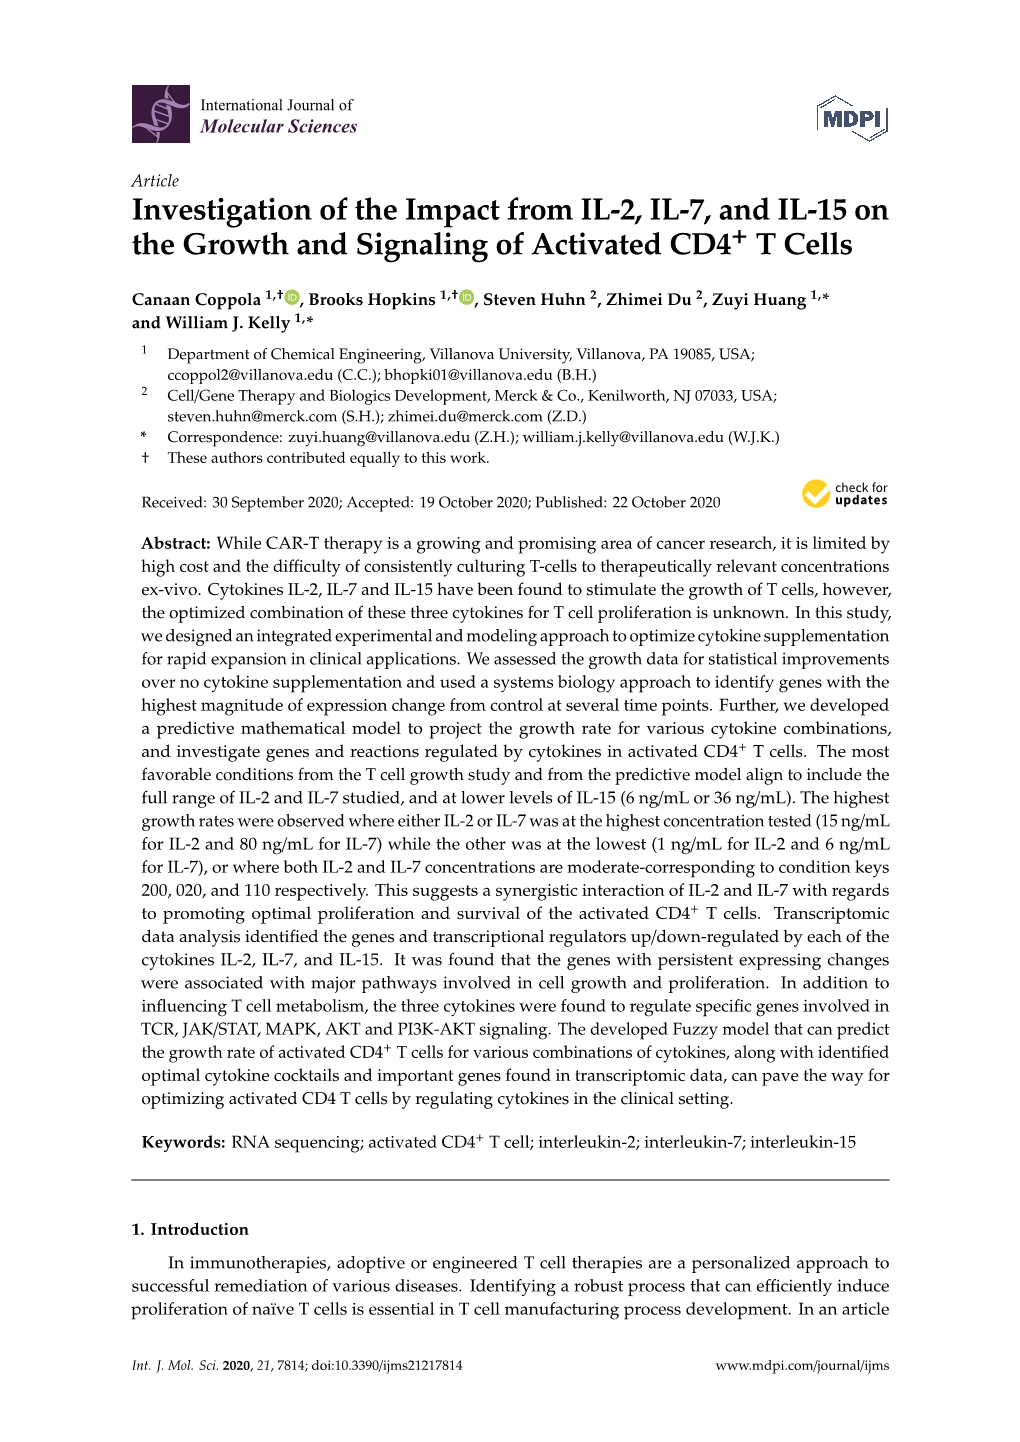 Investigation of the Impact from IL-2, IL-7, and IL-15 on the Growth and Signaling of Activated CD4+ T Cells